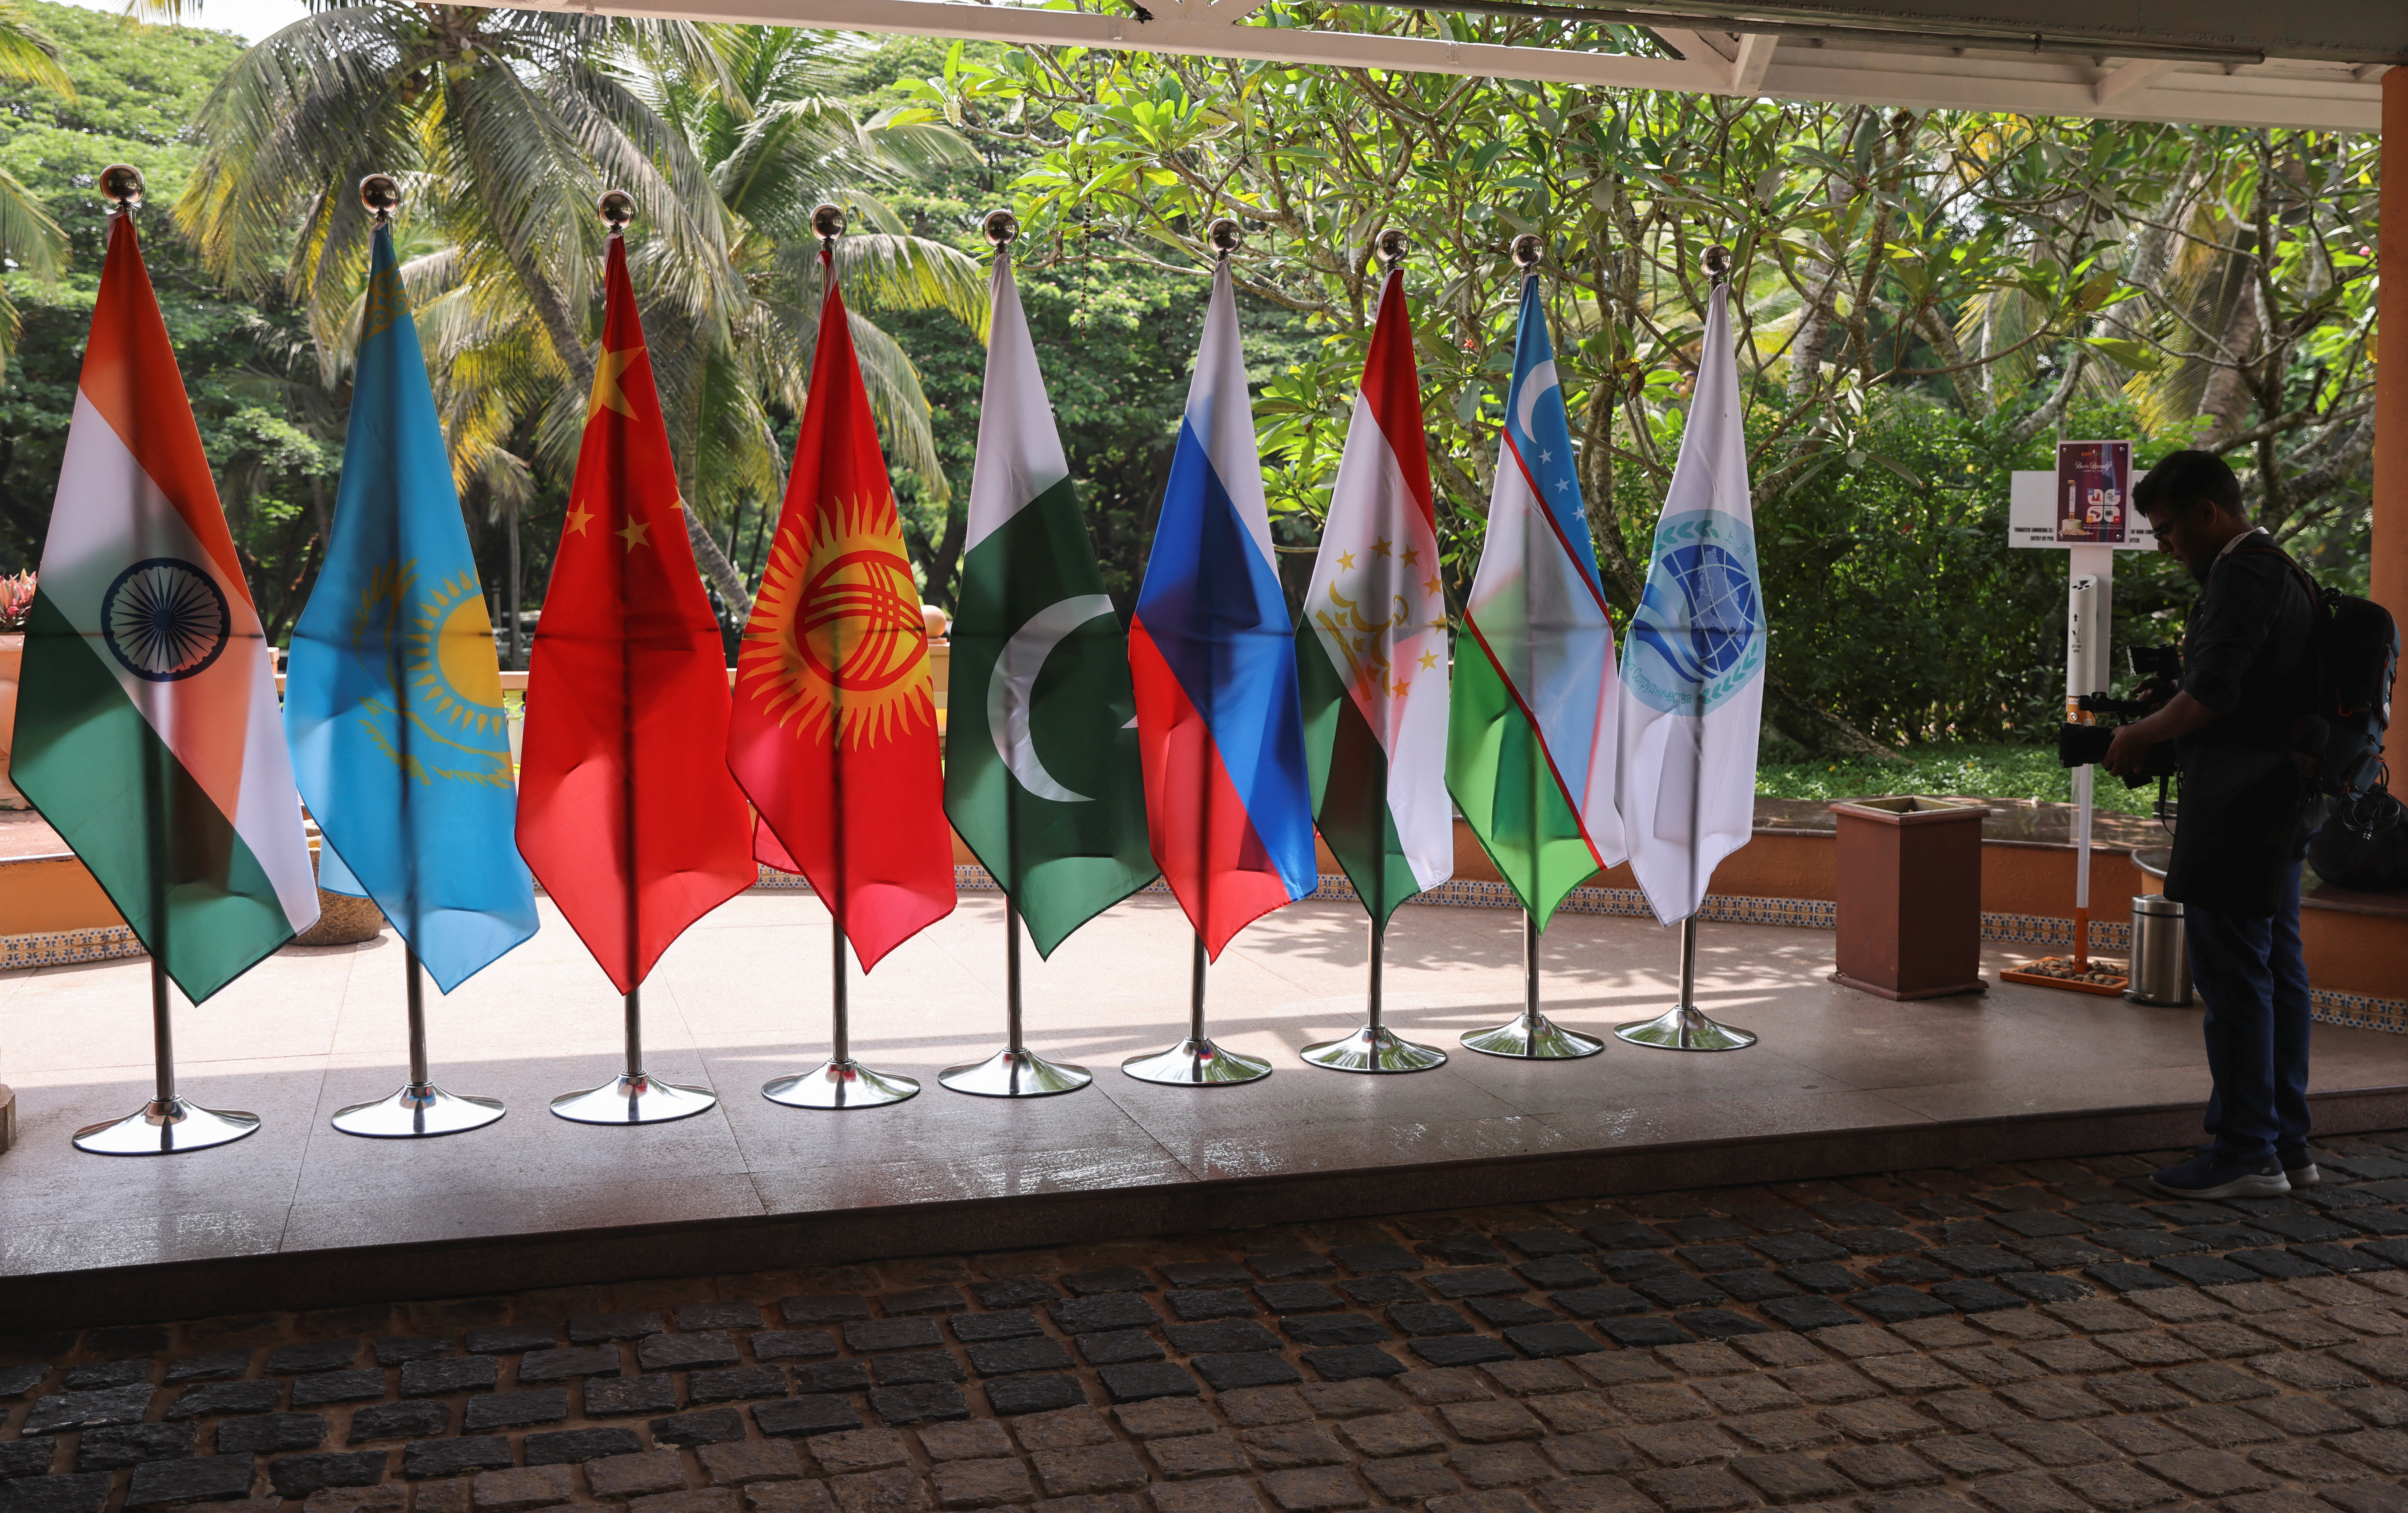 Shanghai Cooperation Organisation (SCO) foreign ministers meet in Goa